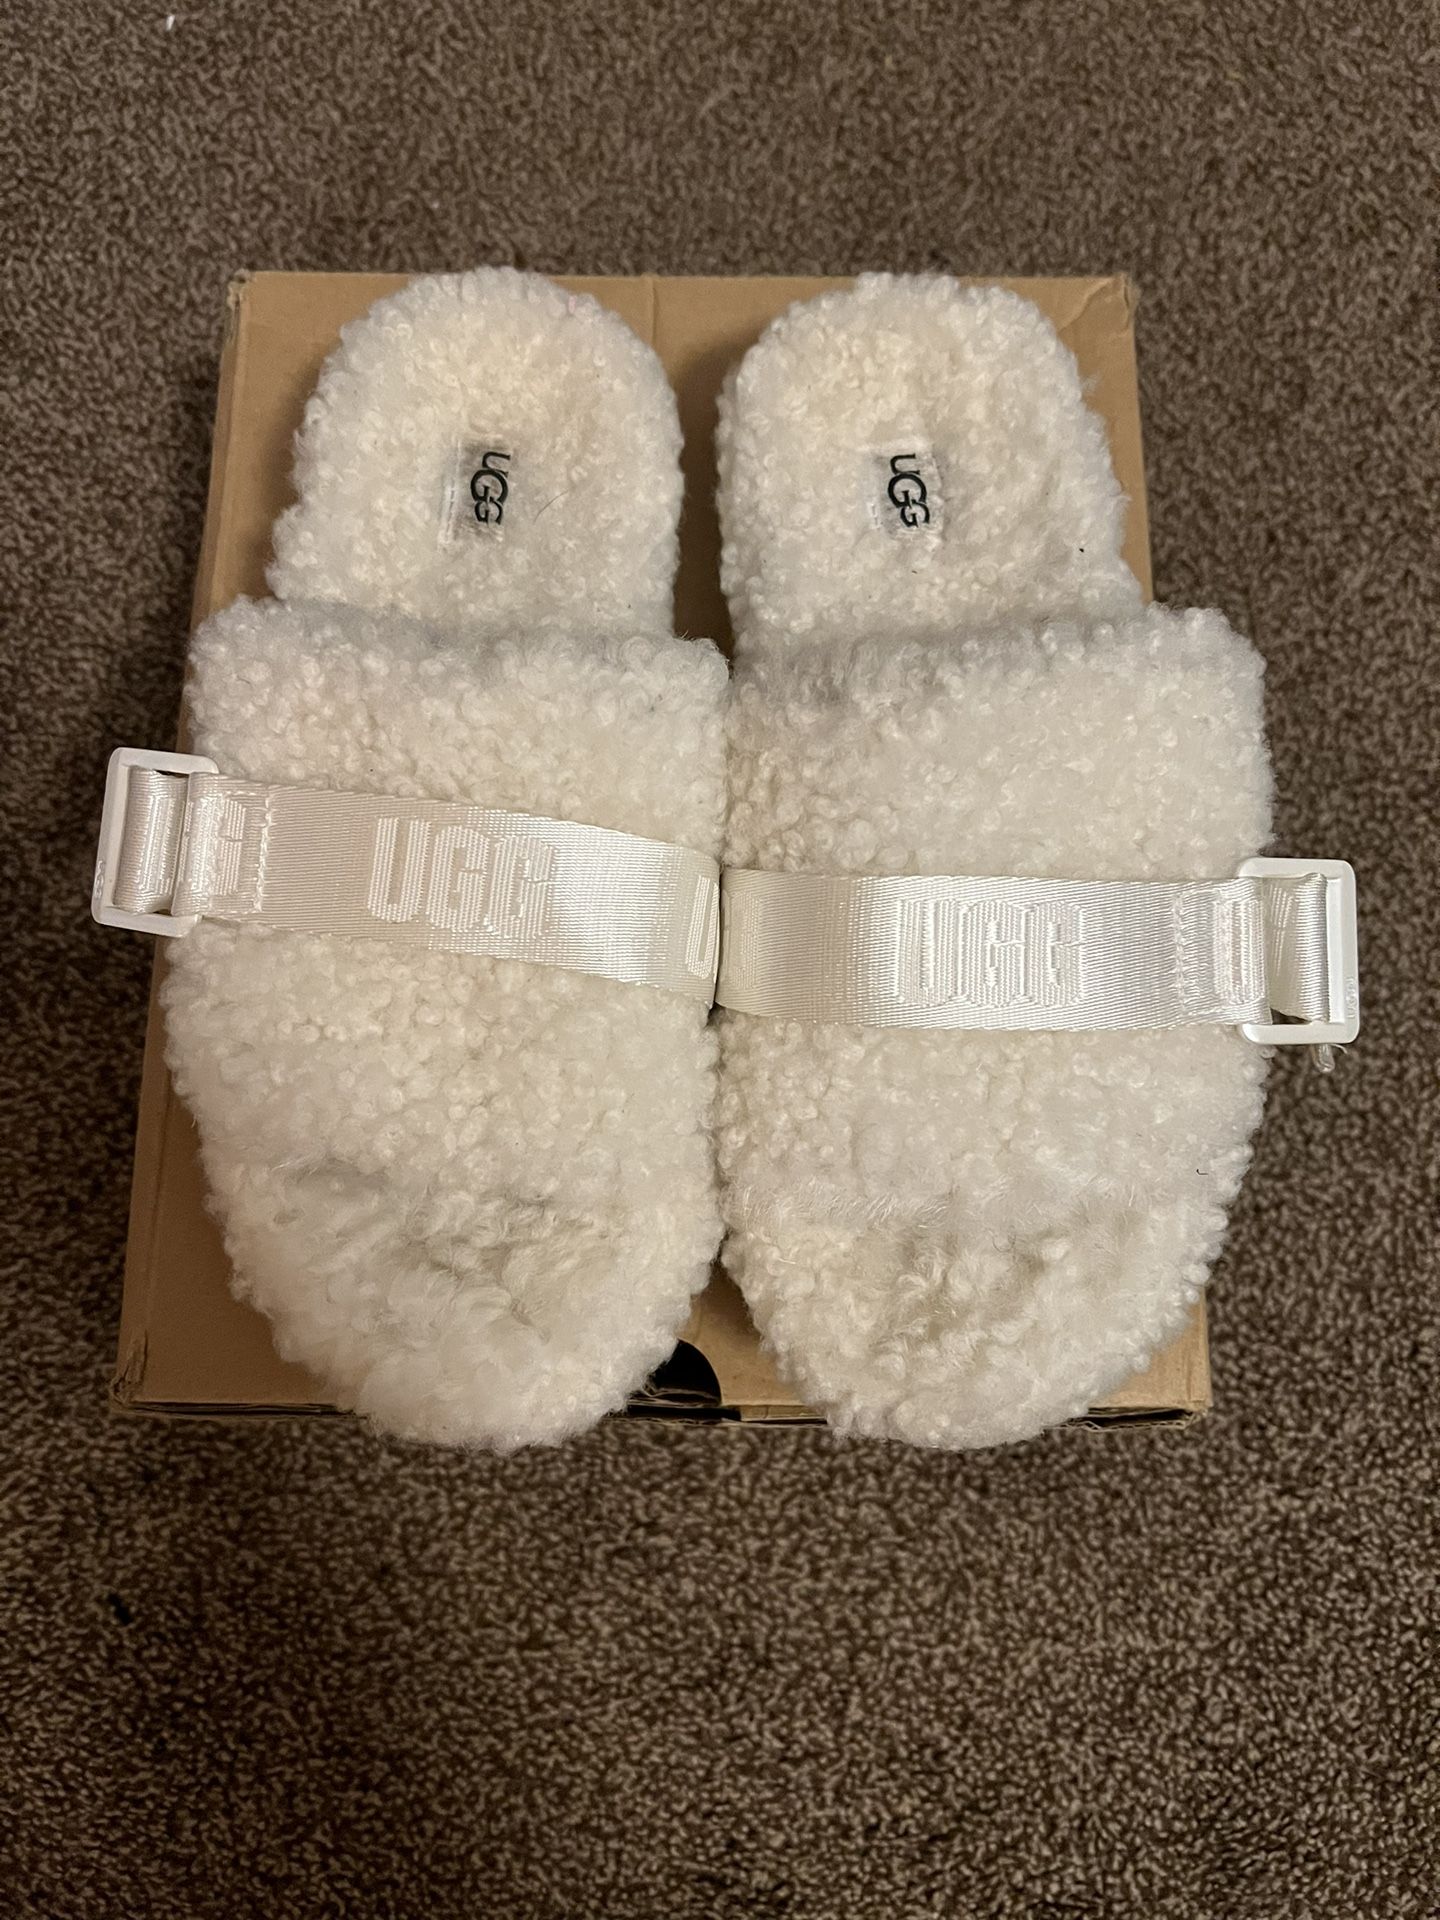 UGG SLIPPERS - Size 8